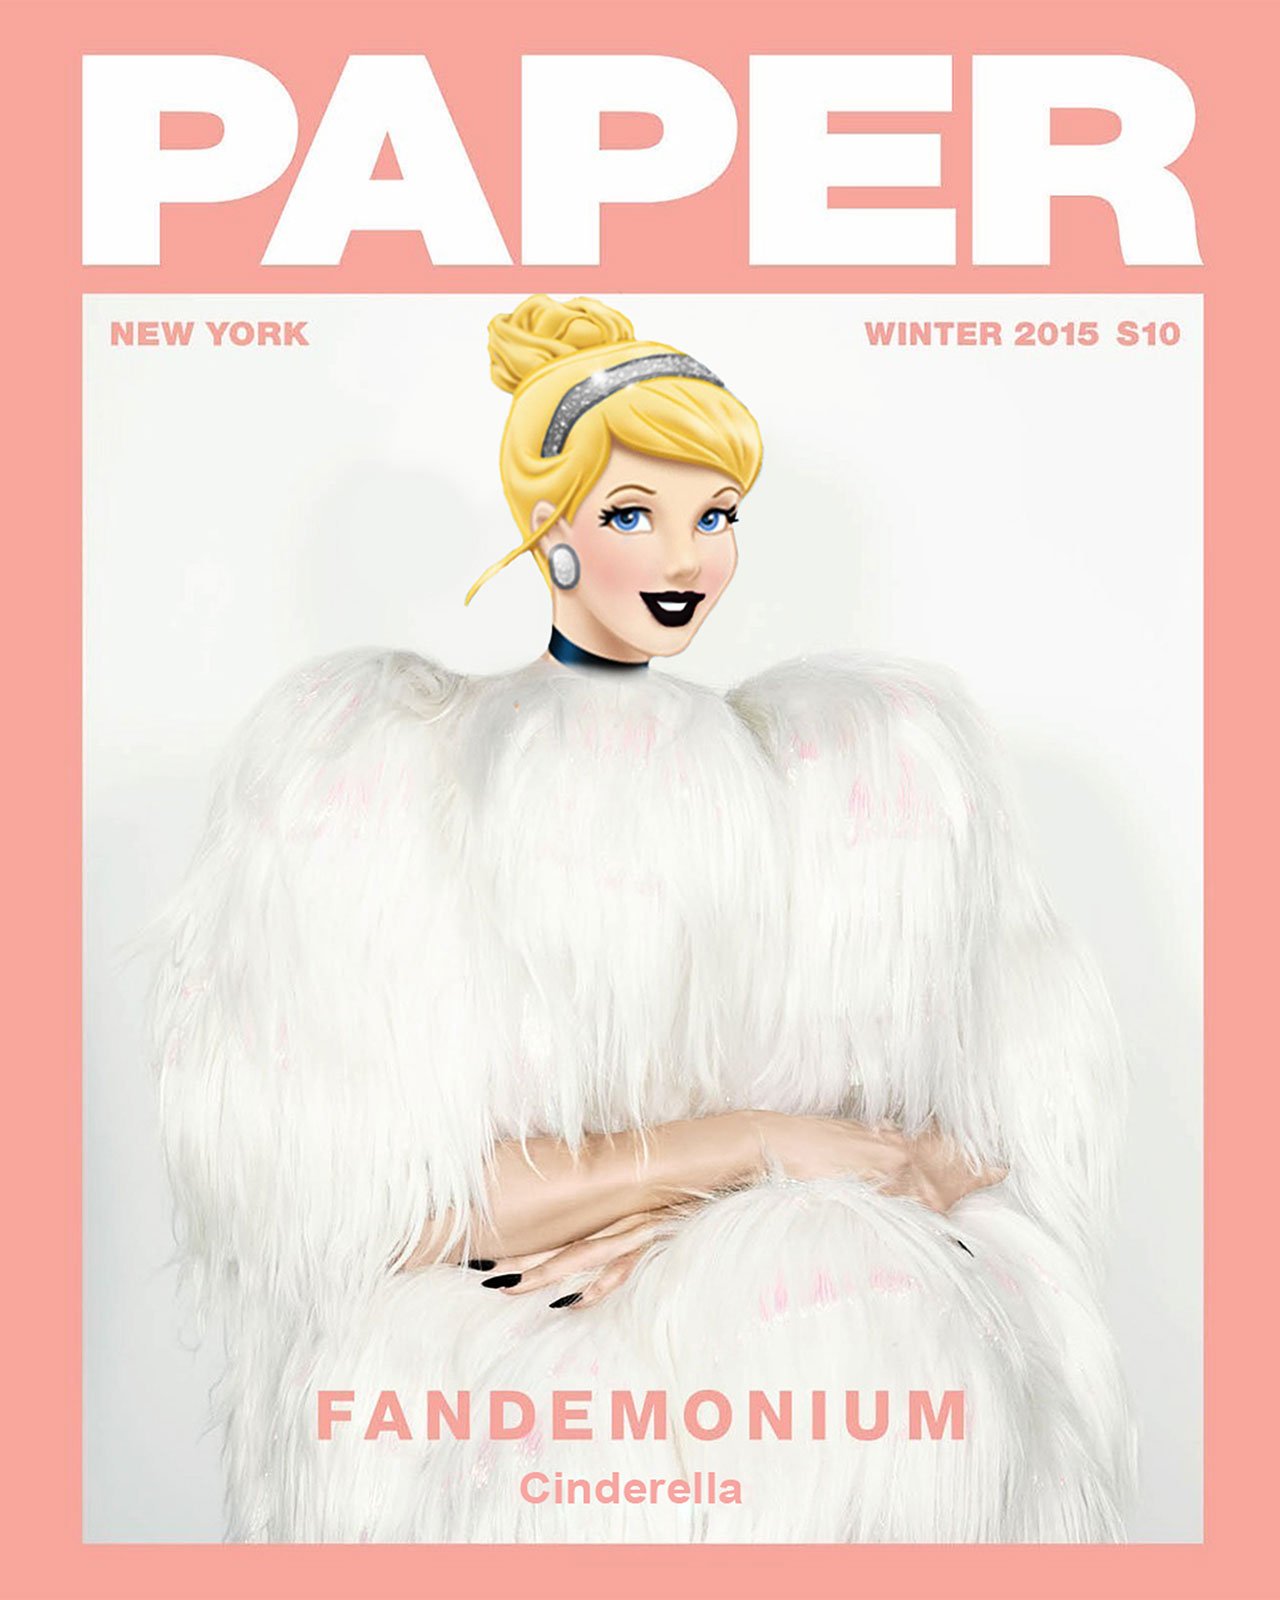 Paris Hilton as Cinderella from Fandemonium cover of Paper Magazine. Photographed by Vijat Mohindra, photo edit by Gregory Masouras.